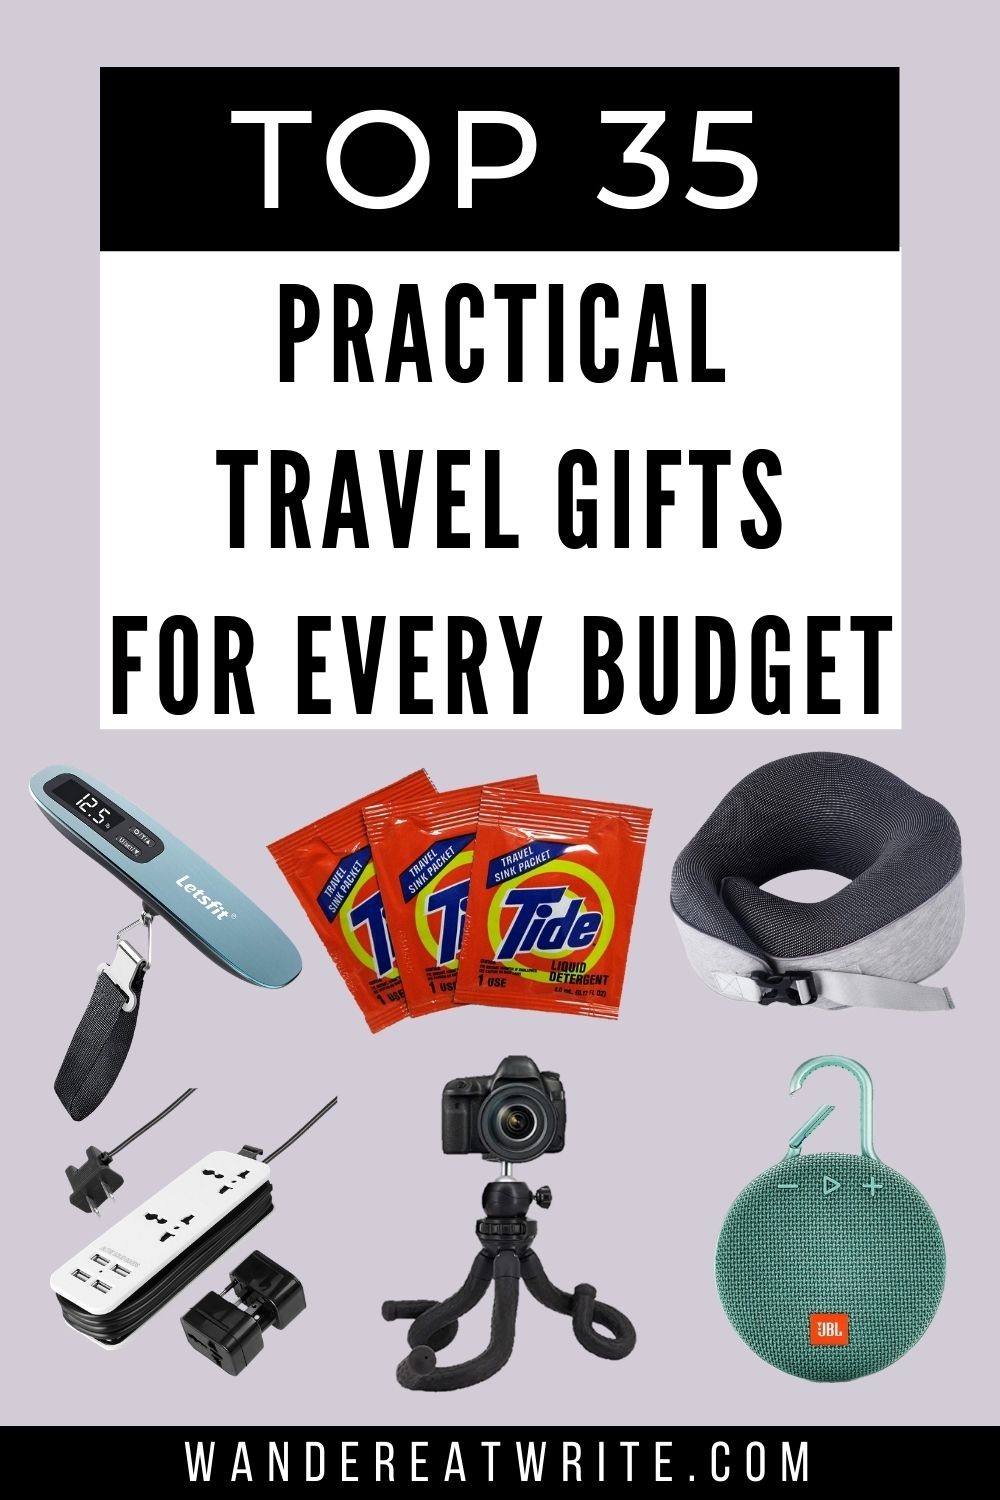 Top 35 practical travel gifts for every budget